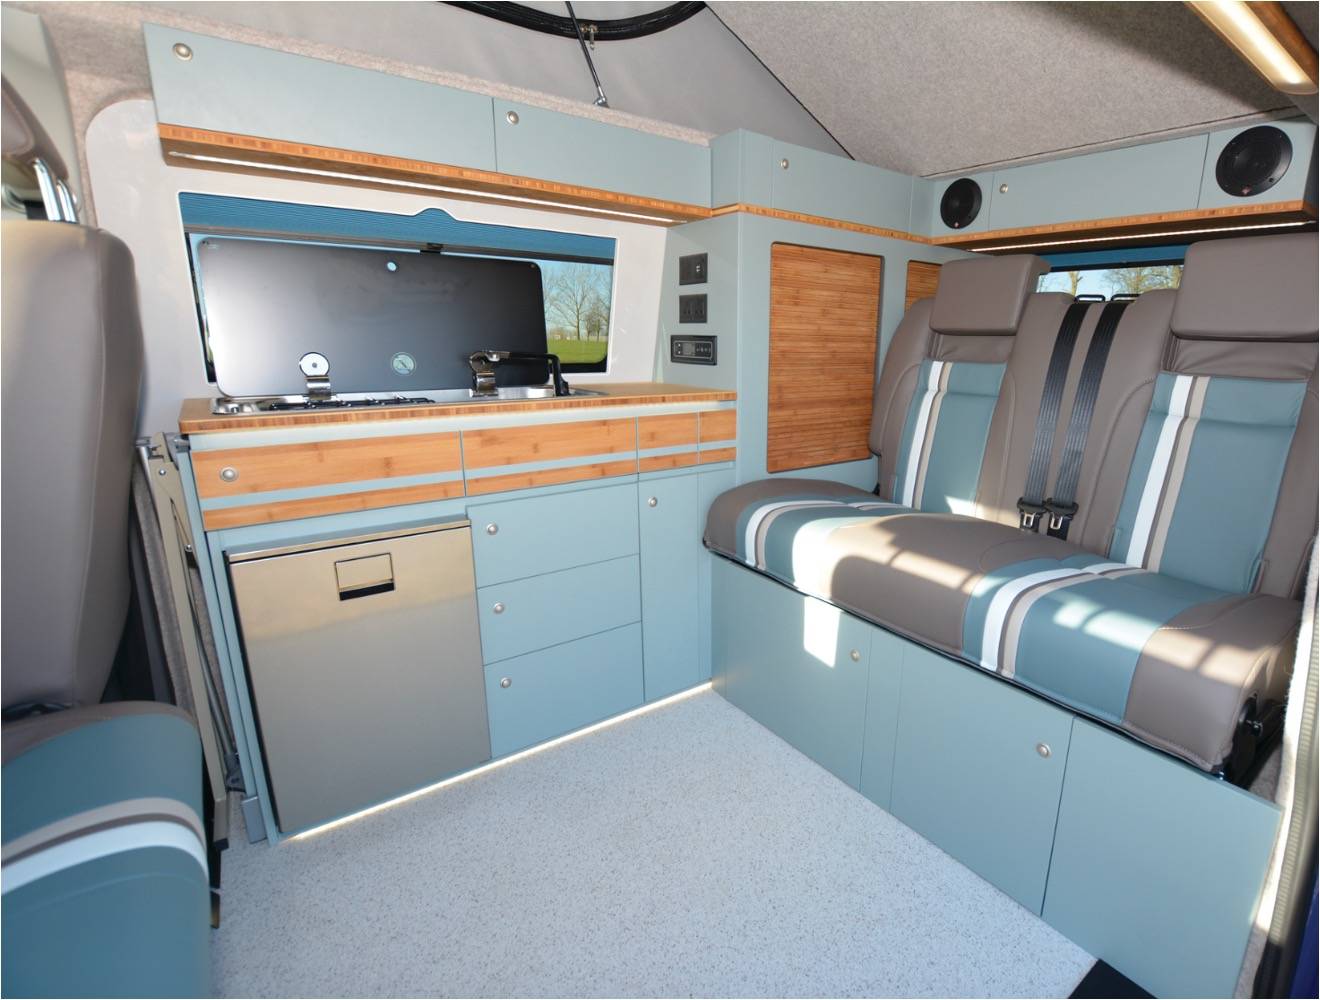 Inside the Out And About Camper